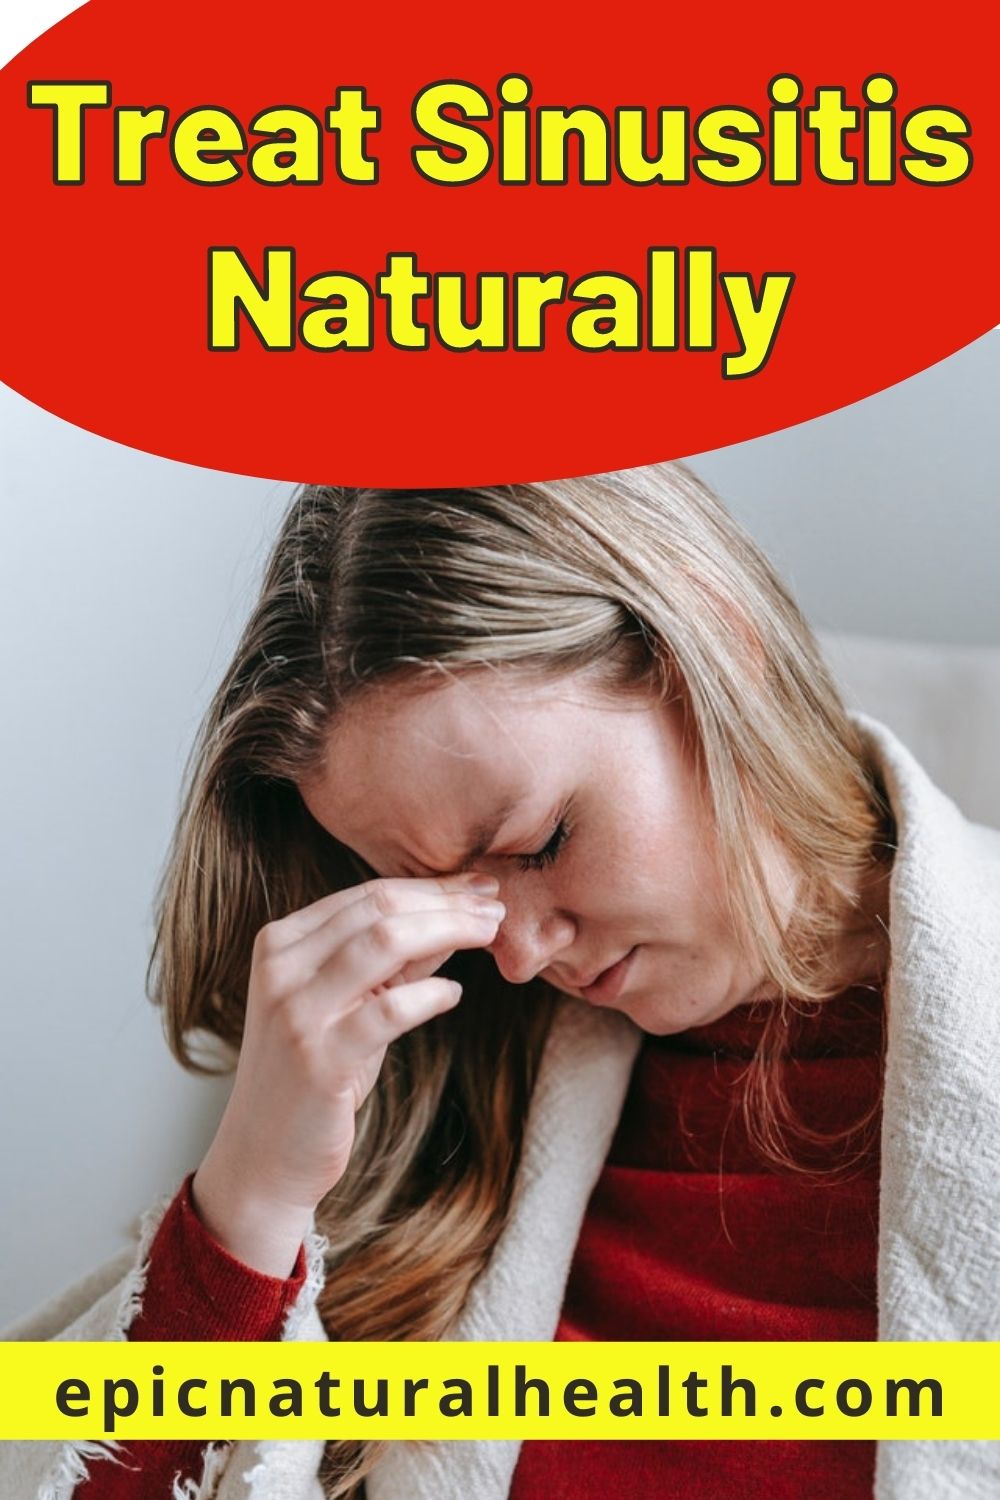 How to Treat & Cure Sinusitis Naturally